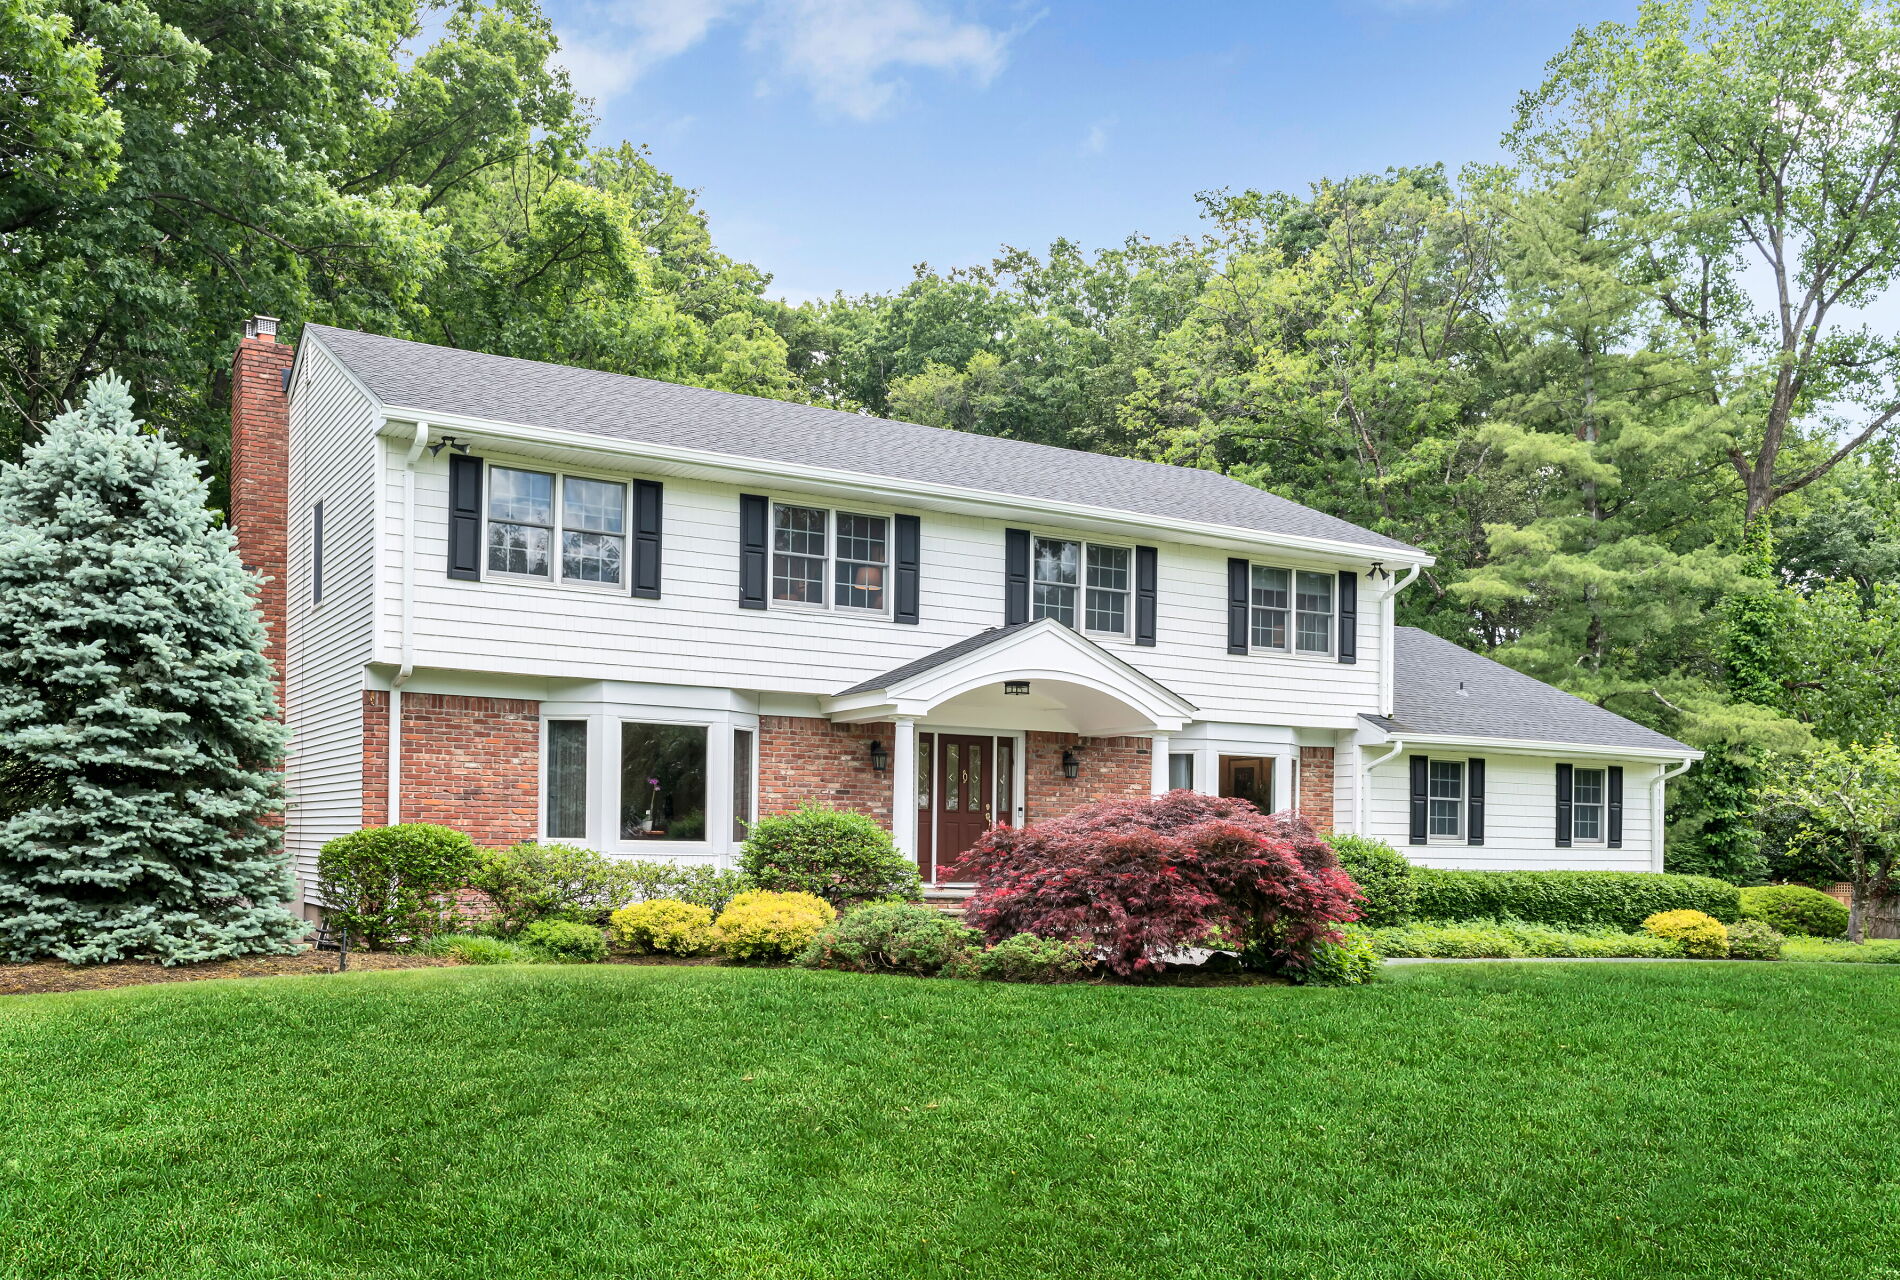 97 Blueberry Dr, Woodcliff Lake, NJ 07677 - UNDER CONTRACT